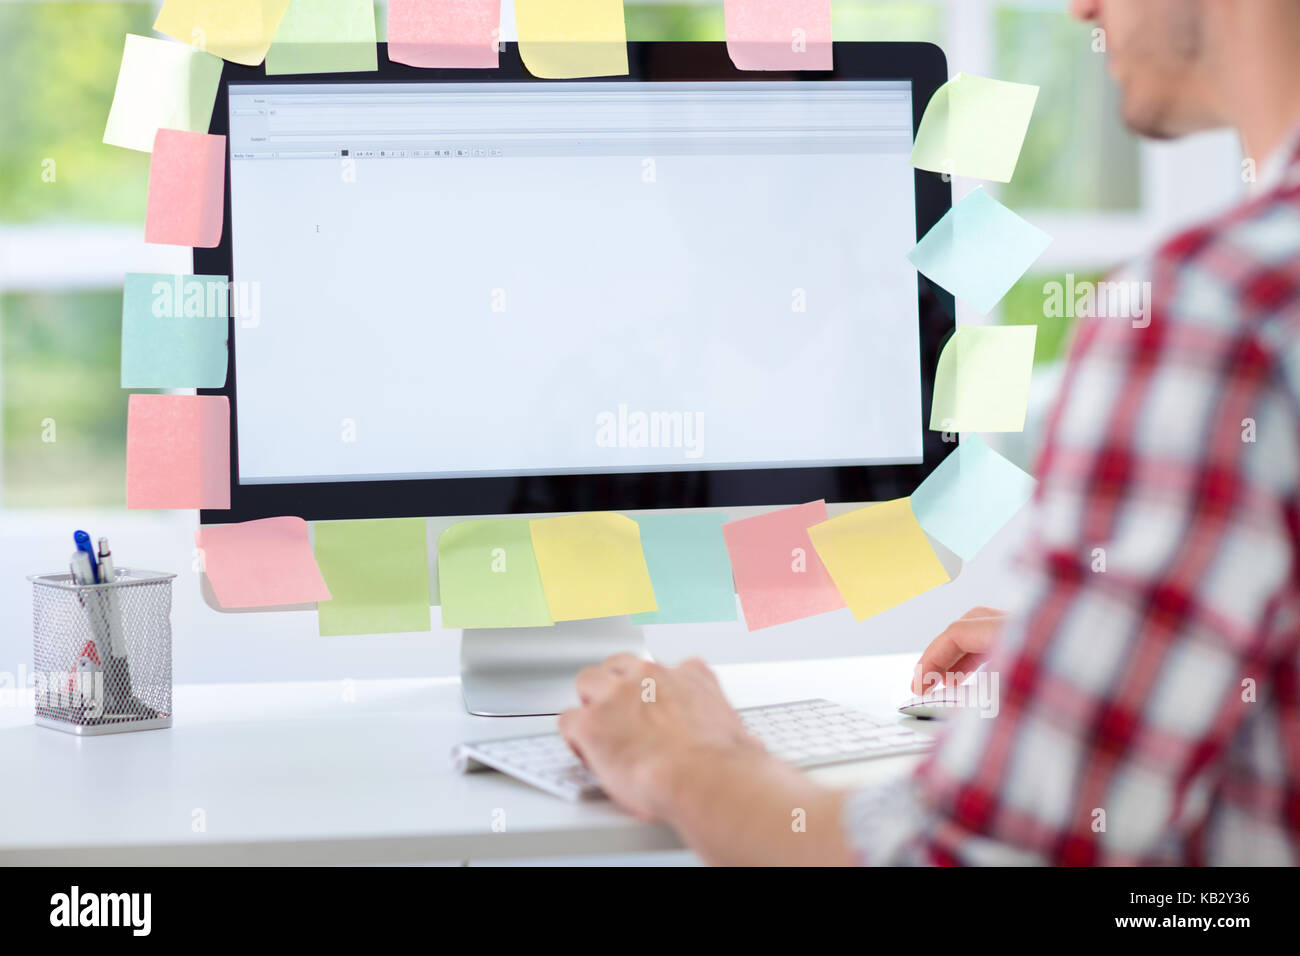 Man working on computer with sticky notes, back view Stock Photo